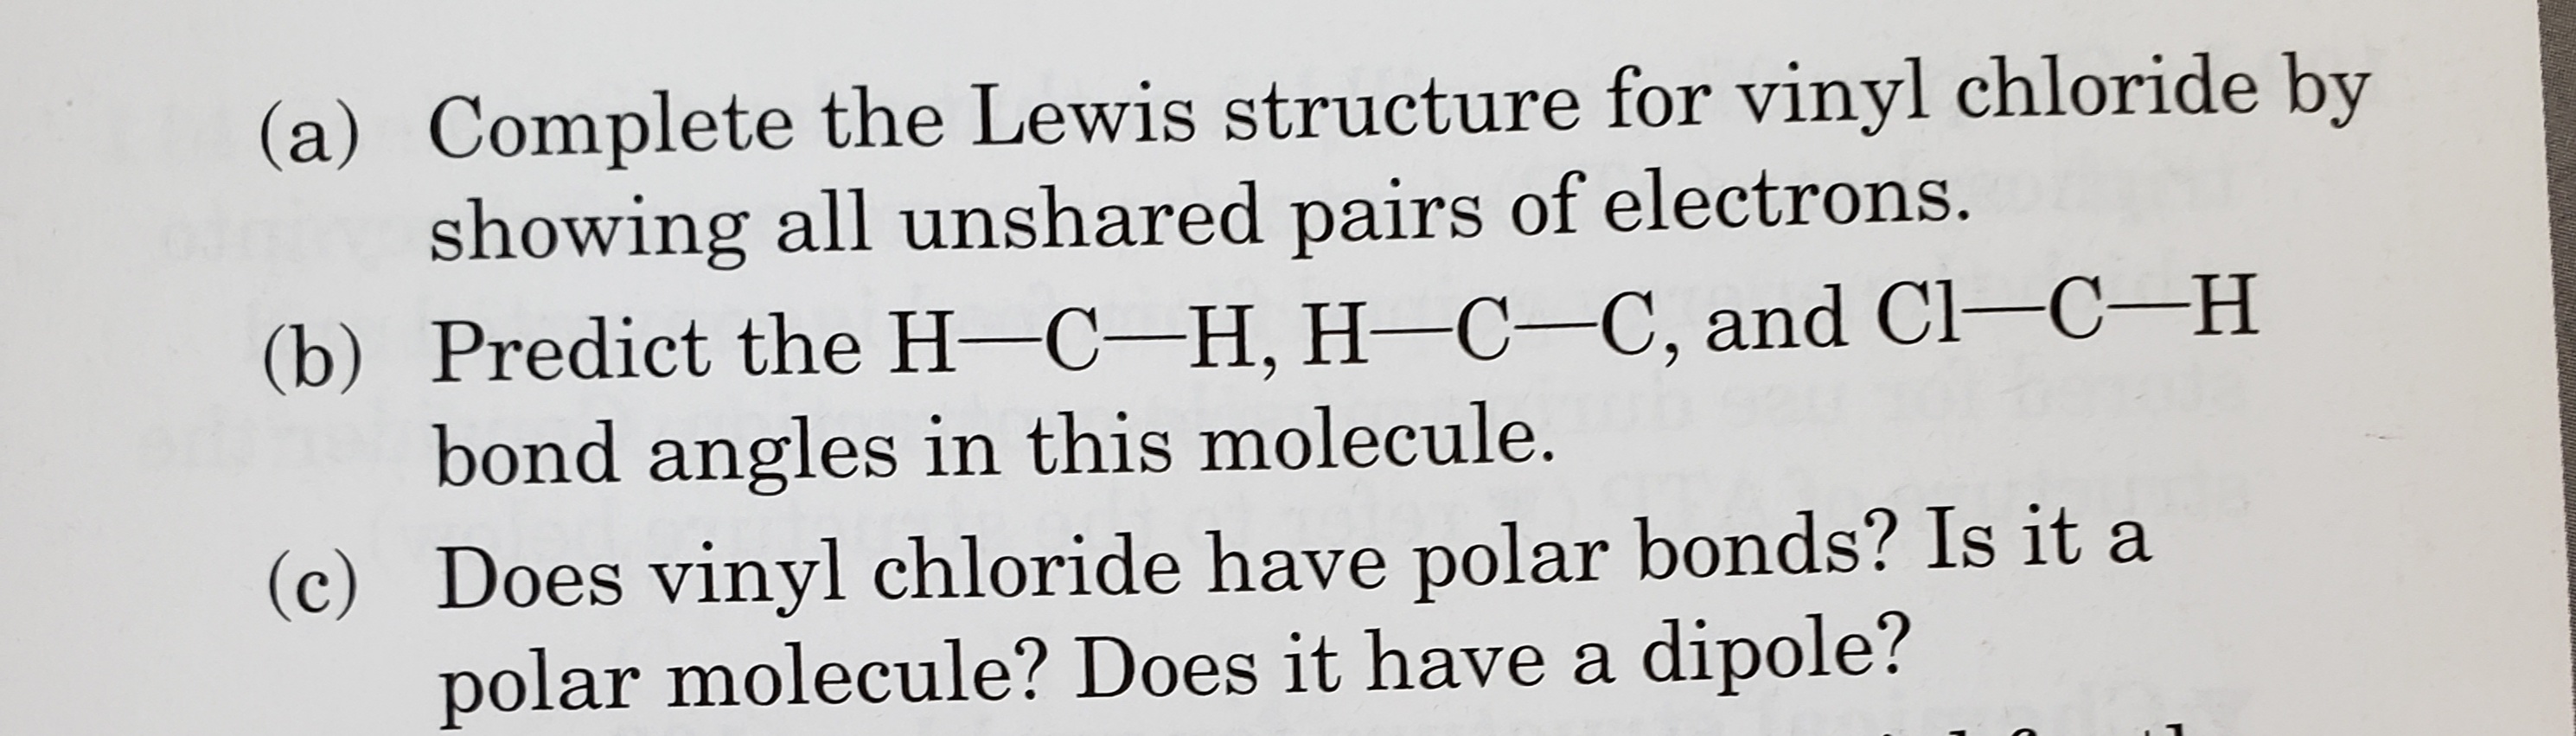 (a) Complete the Lewis structure for vinyl chloride by
showing all unshared pairs of electrons.
(b) Predict the H-C-H, H-C-C, and Cl-C-H
bond angles in this molecule.
(c) Does vinyl chloride have polar bonds? Is it a
polar molecule? Does it have a dipole?
